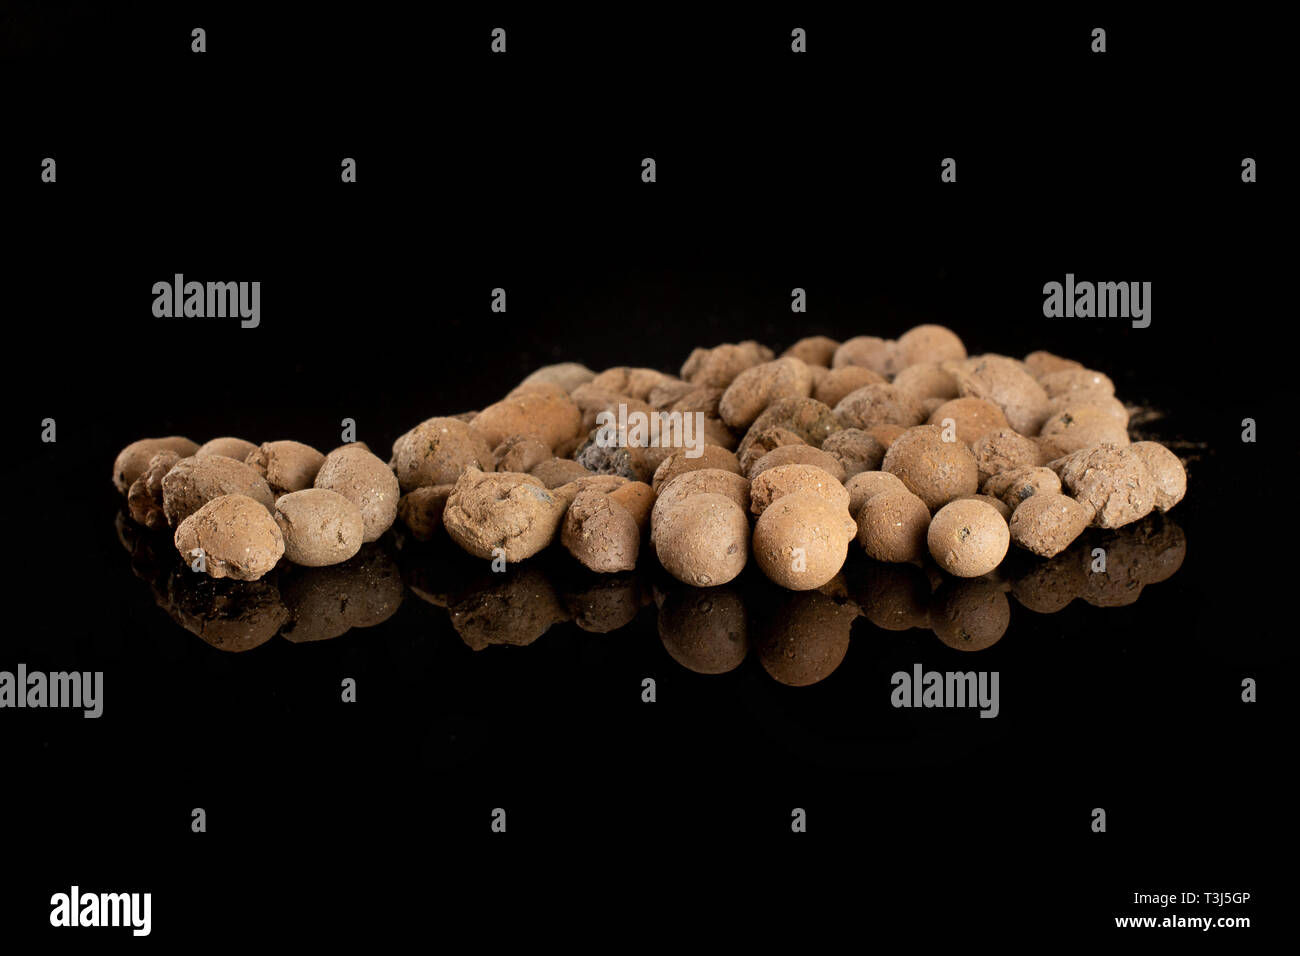 Lot of whole brown clay pebbles (leca) isolated on black glass Stock Photo